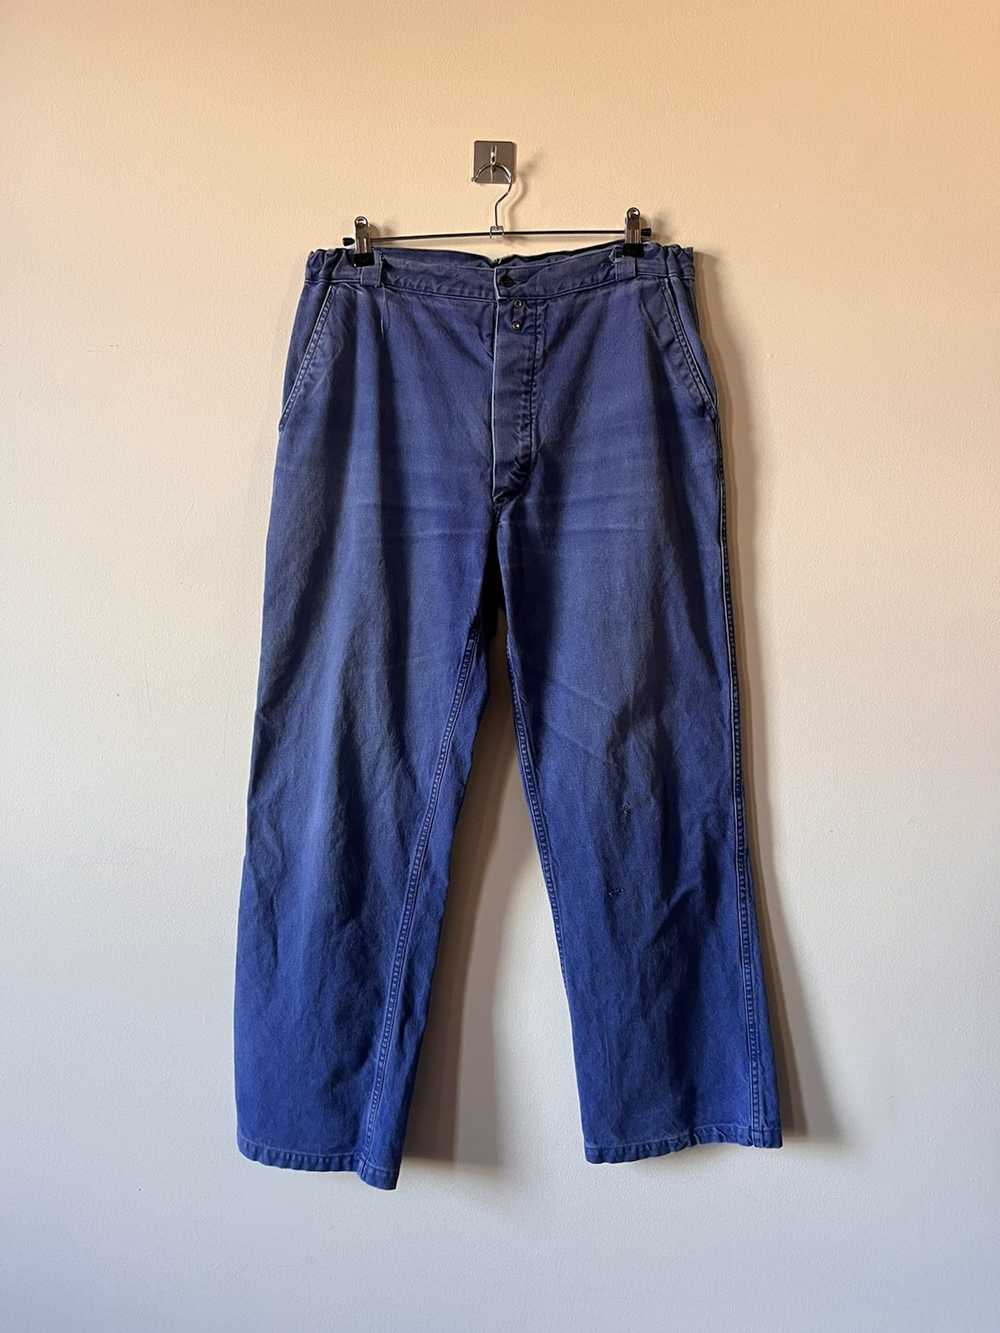 Vintage Vintage French Workwear Pants 60s faded - image 2